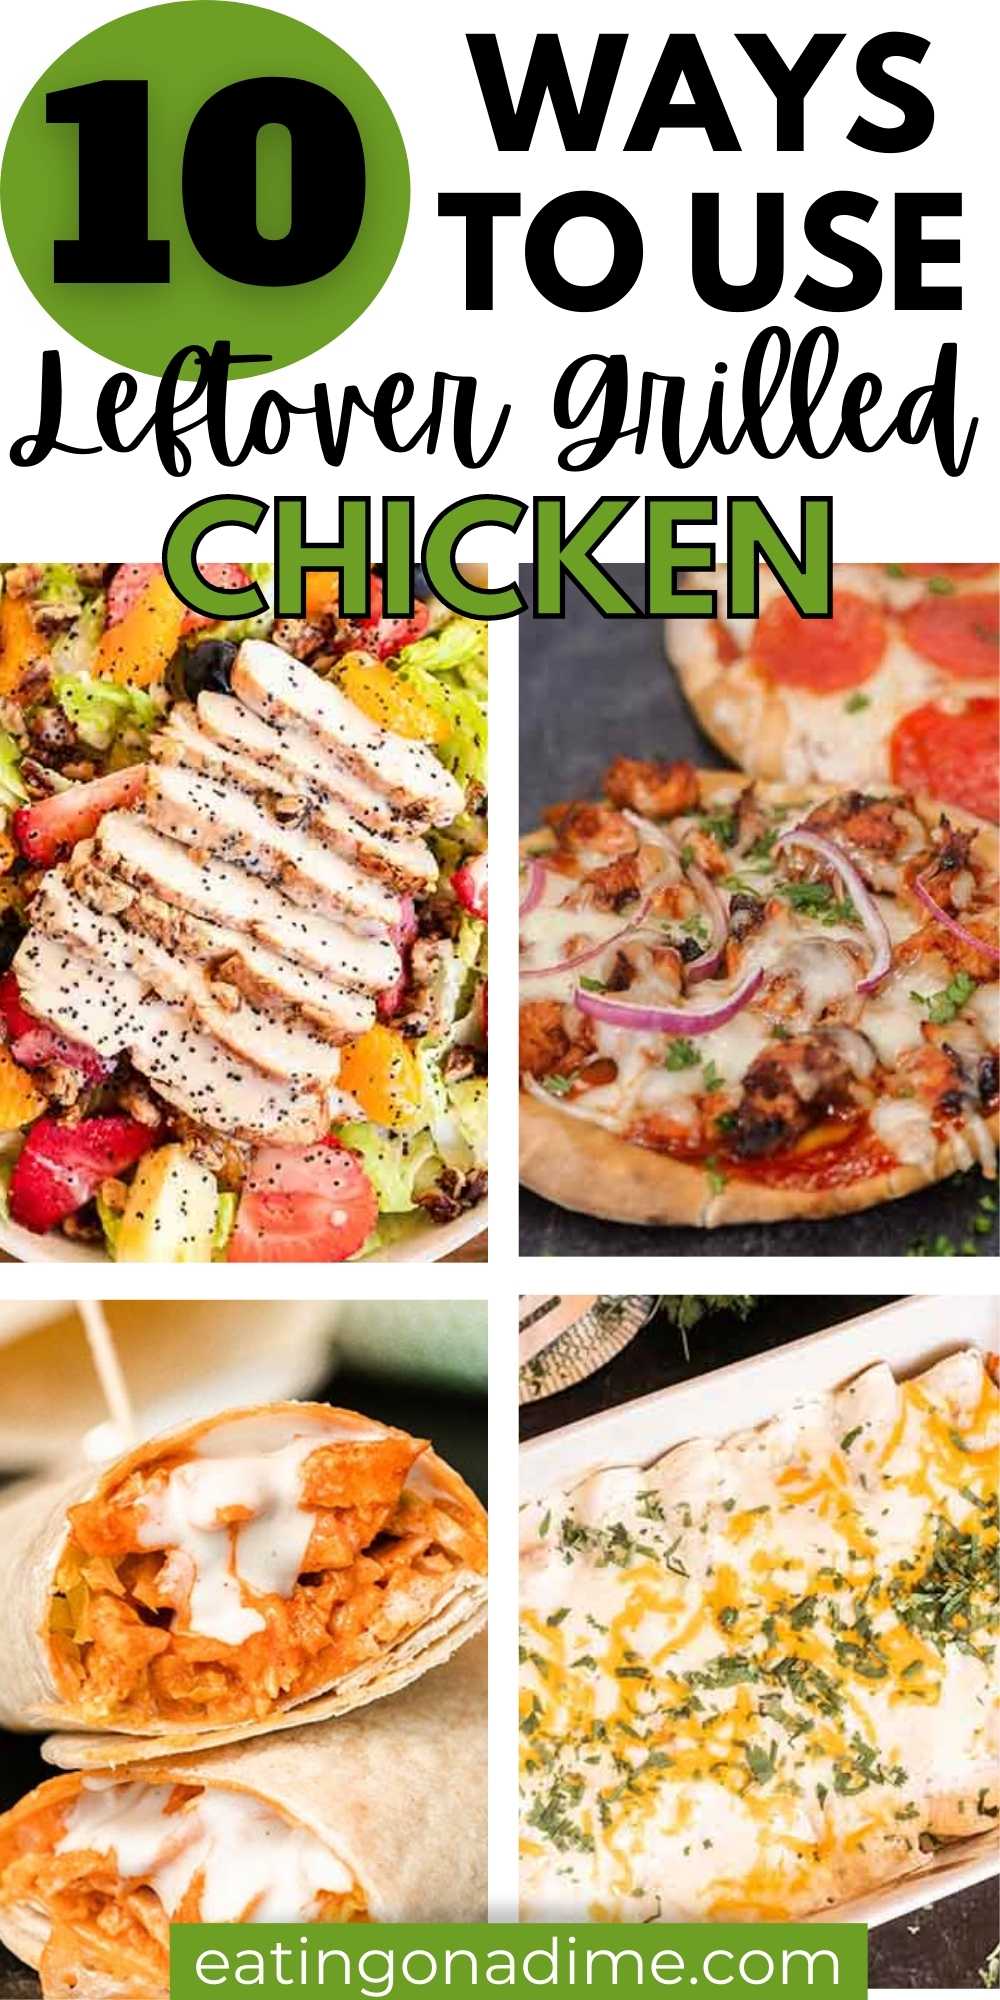 Save money by grilling extra chicken to make these easy and delicious leftover grilled chicken recipes.  The best leftover chicken recipes including dinners, pasta, rice and more!  You will love these healthy and easy leftover grilled chicken ideas! #eatingonadime #kitchenhacks #leftoverrecipes #chickenrecipes 
